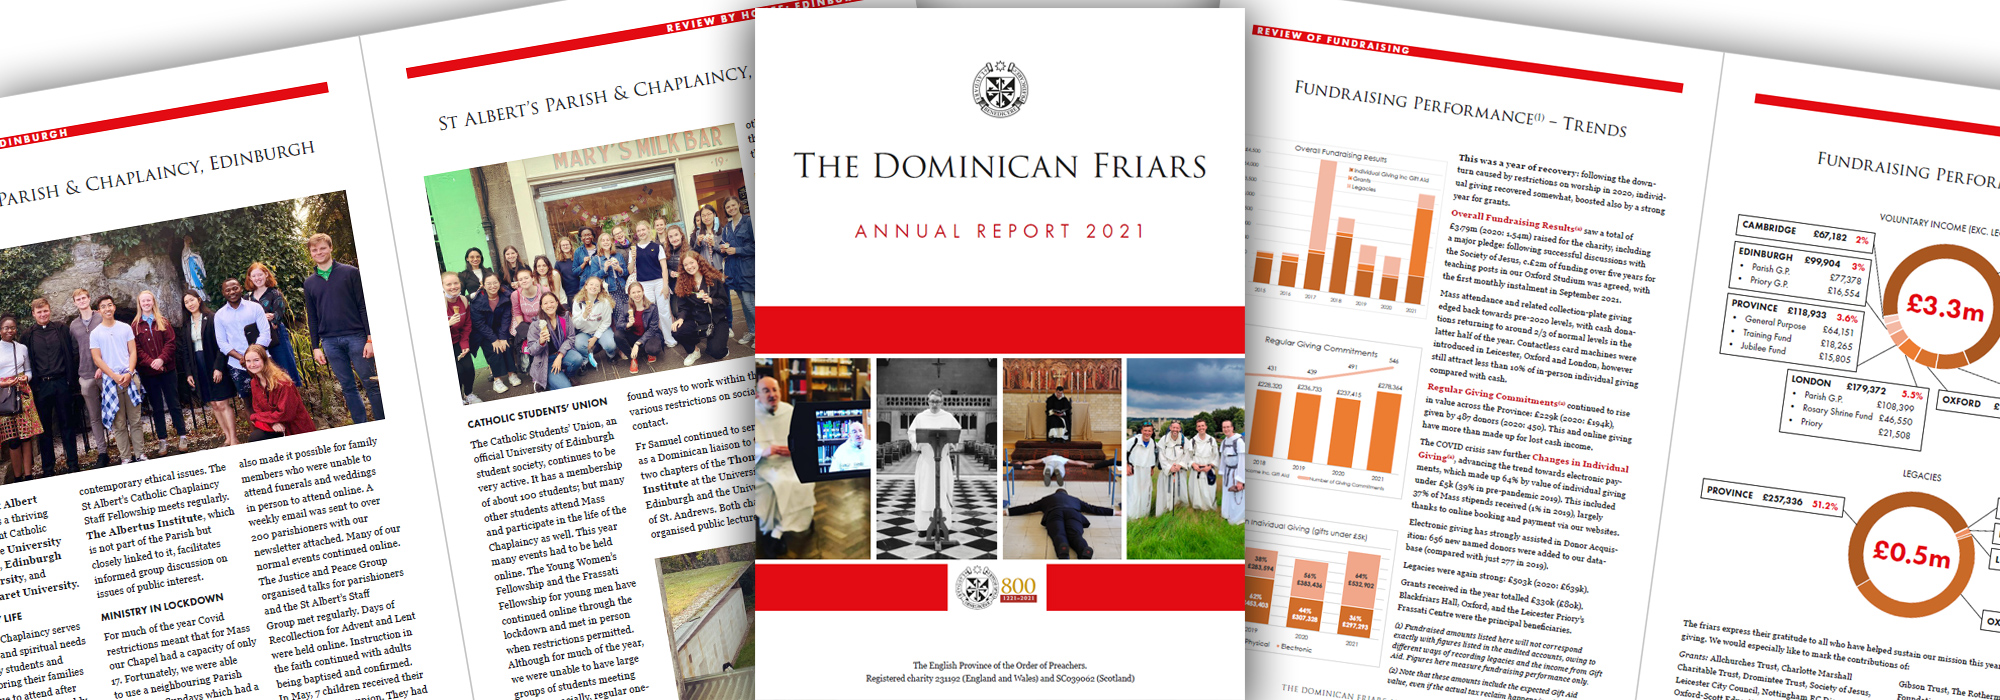 Annual Report now available